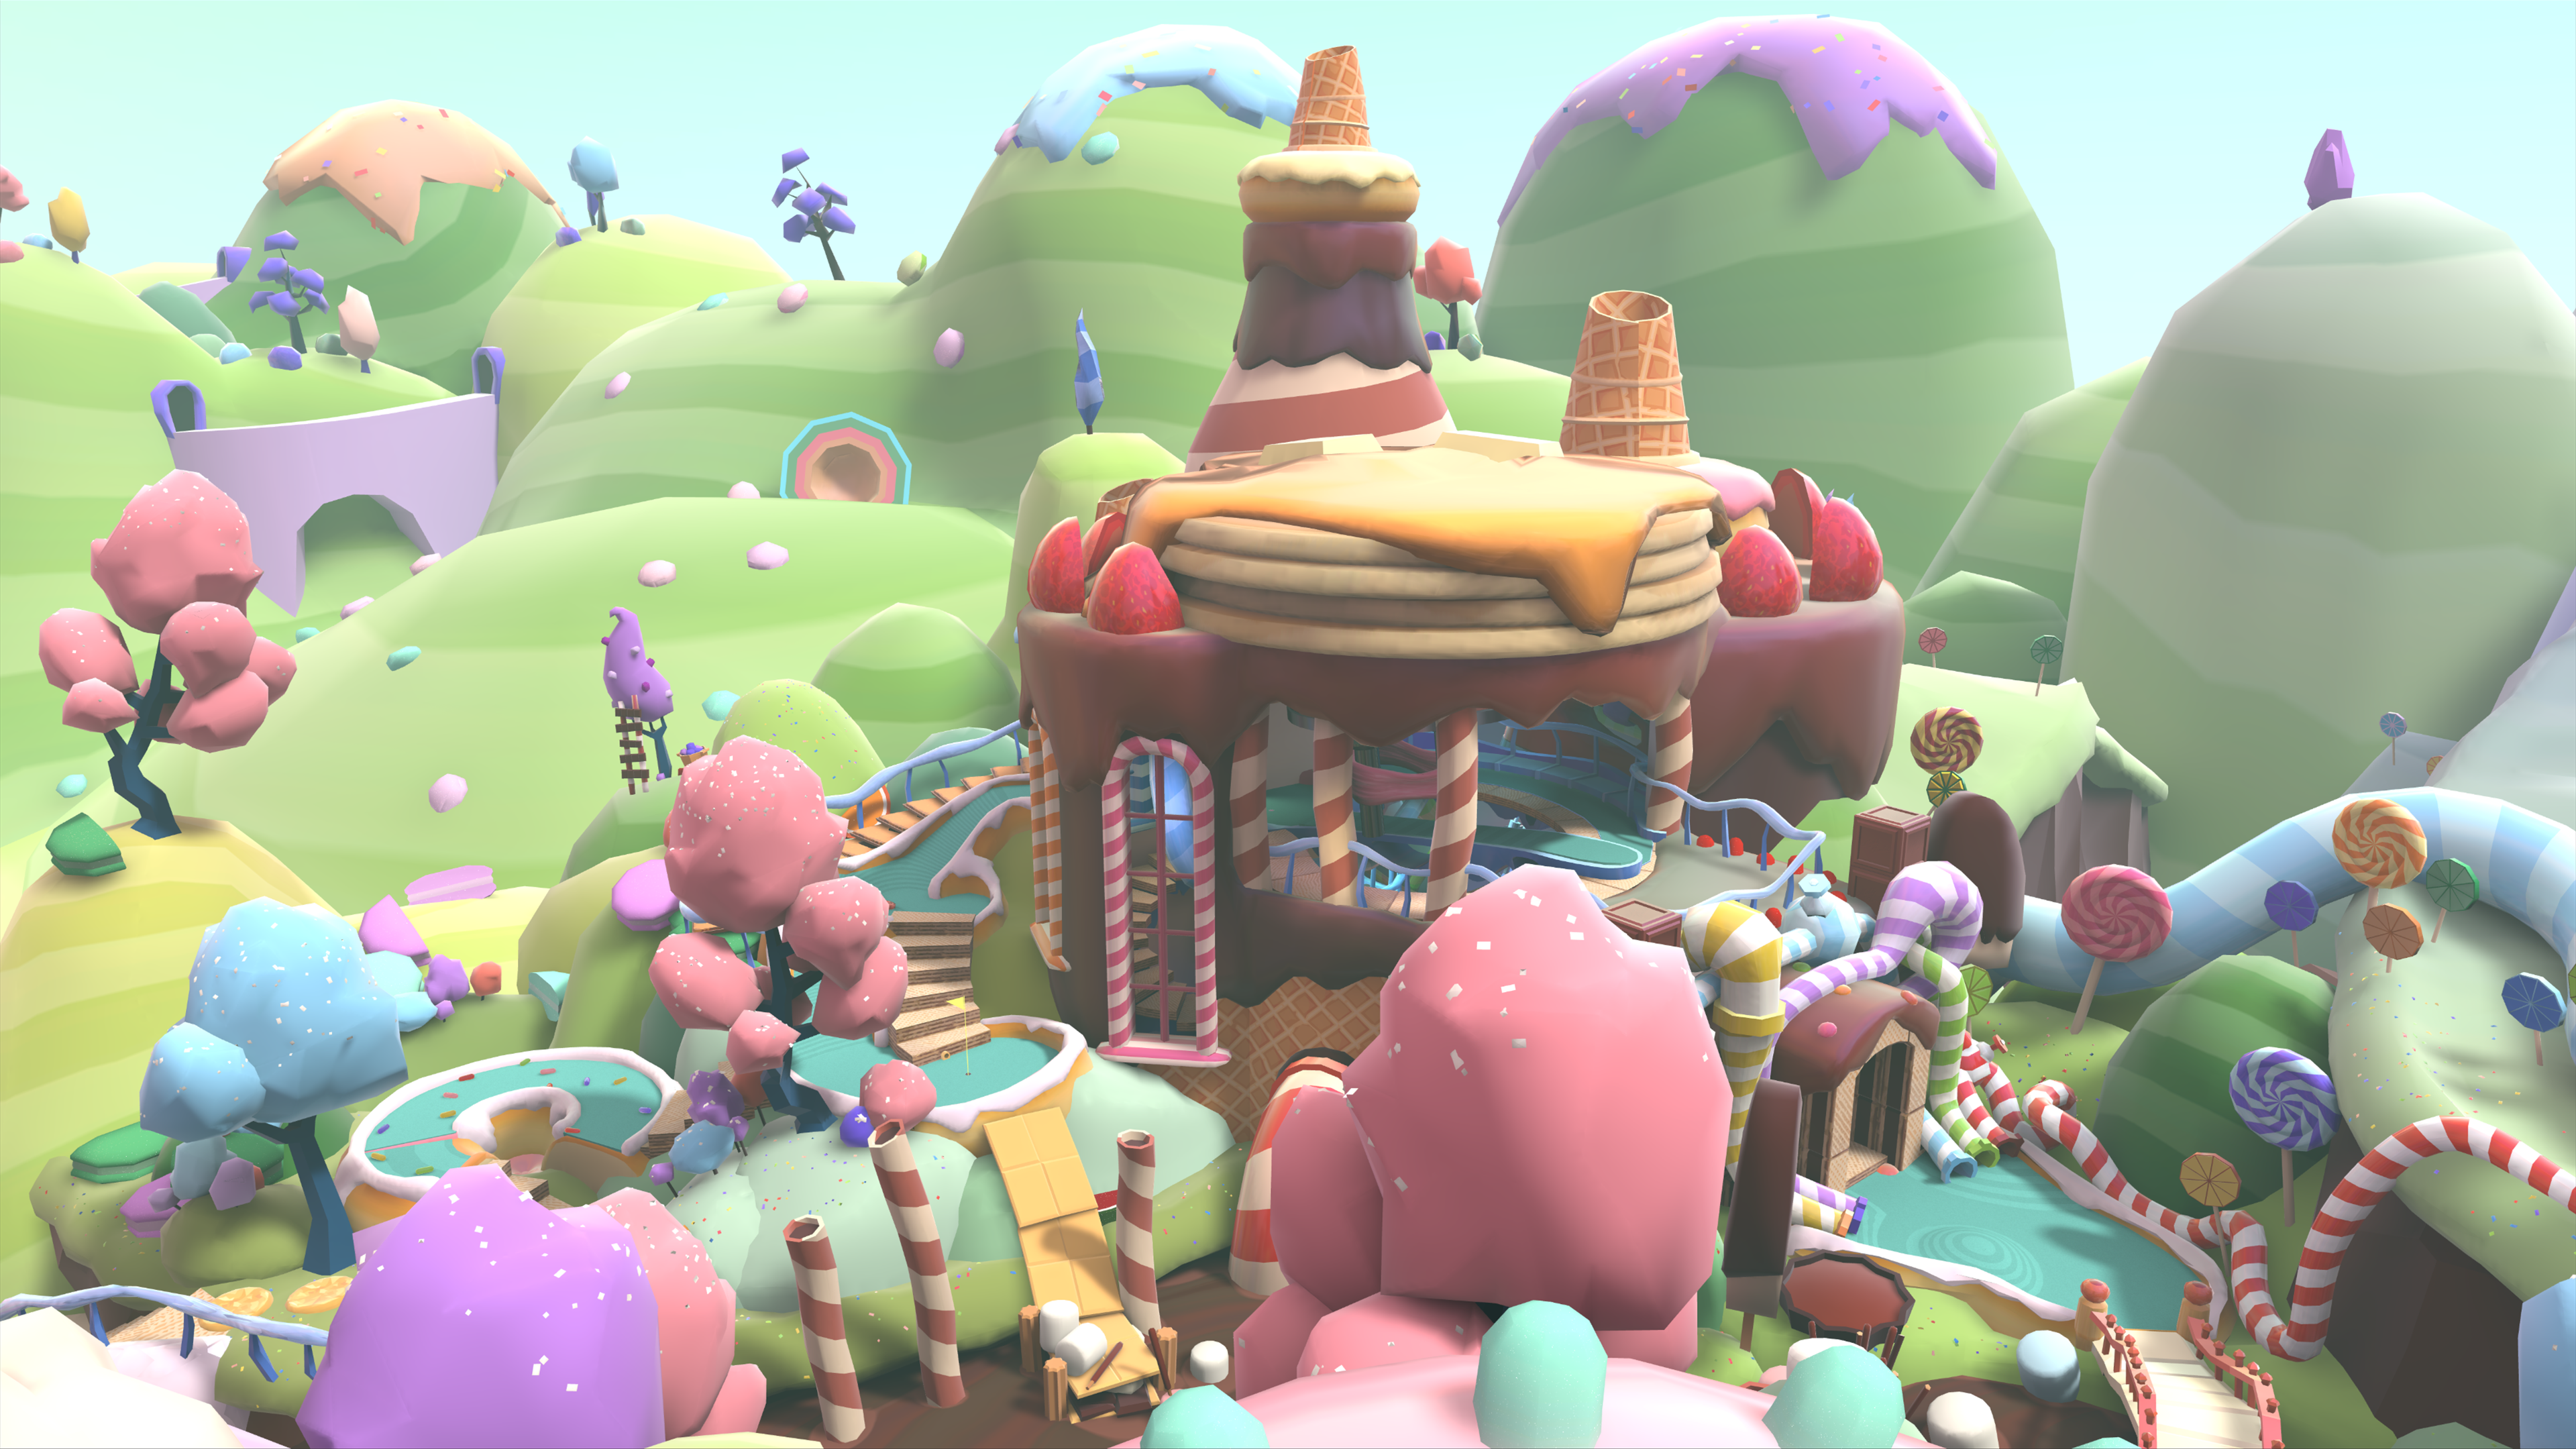 An bundance of oversized sweet treats make up this Walkabout Mini Golf course